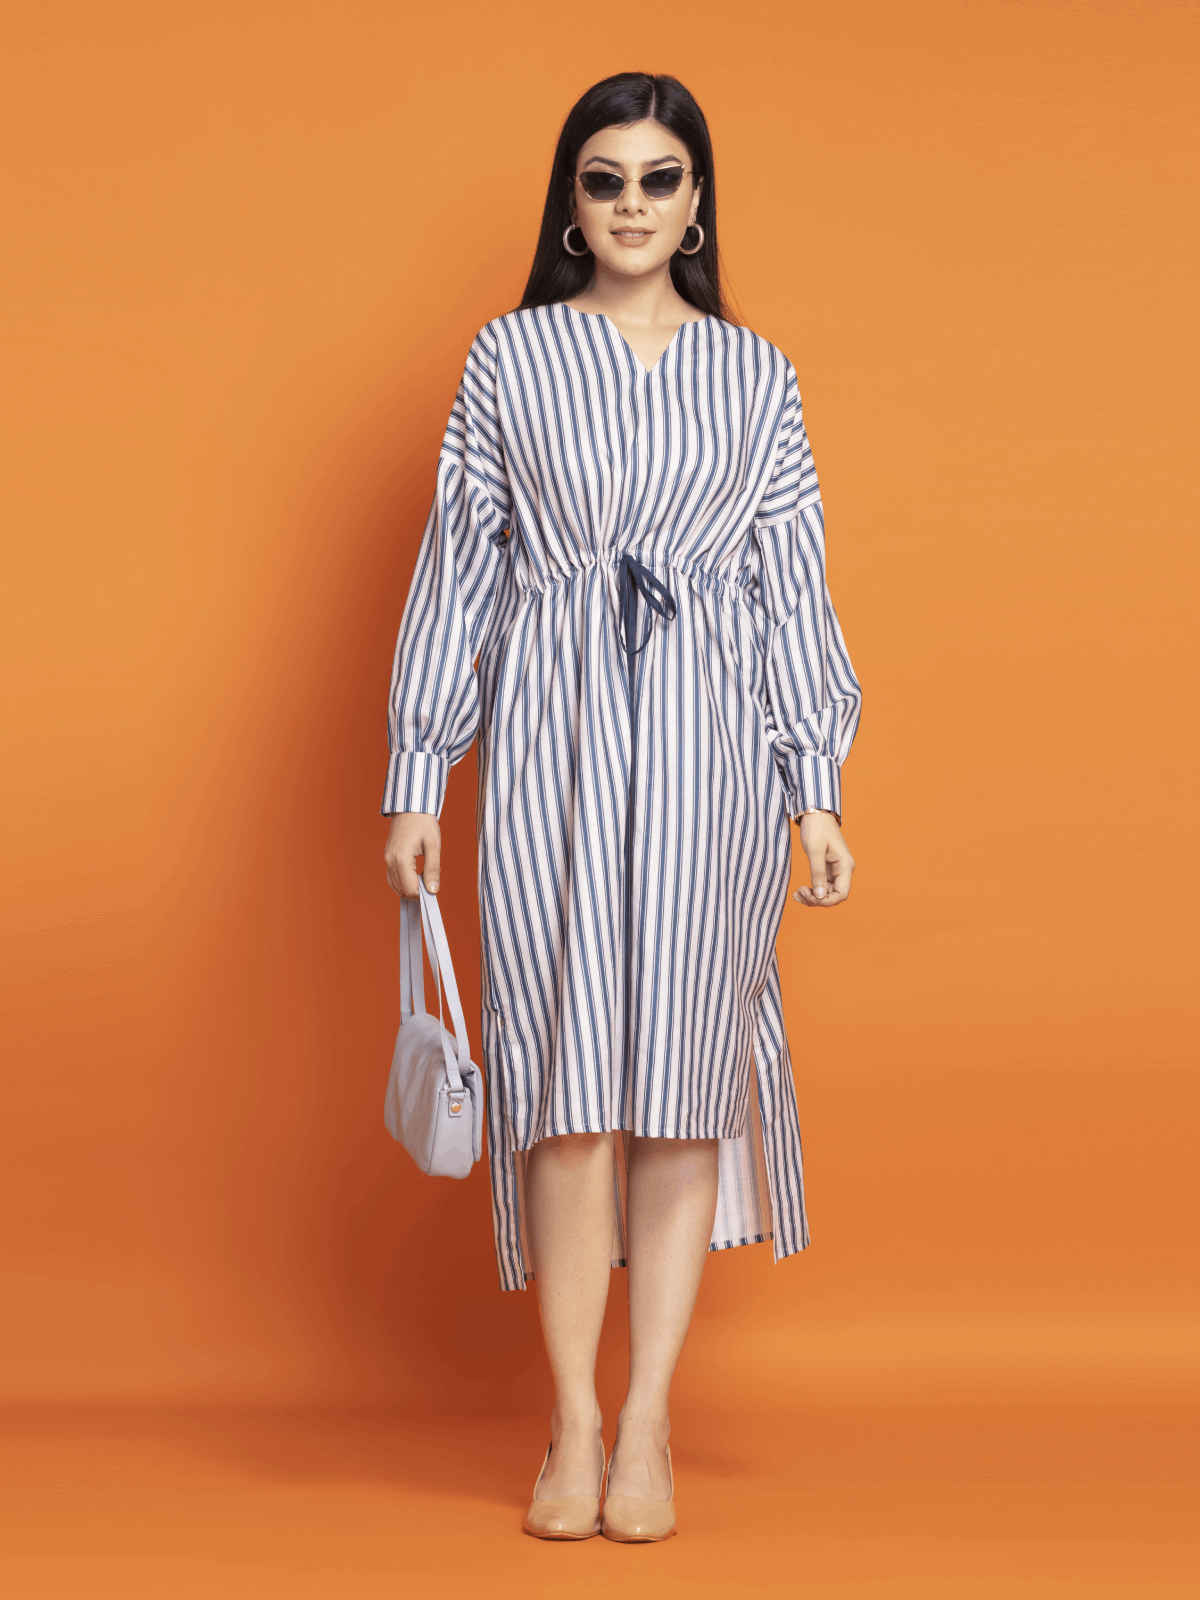 Shop Now Up-Down Style Kaftan Blue-White Dress From Octics At Rs 1249 | OCTICS